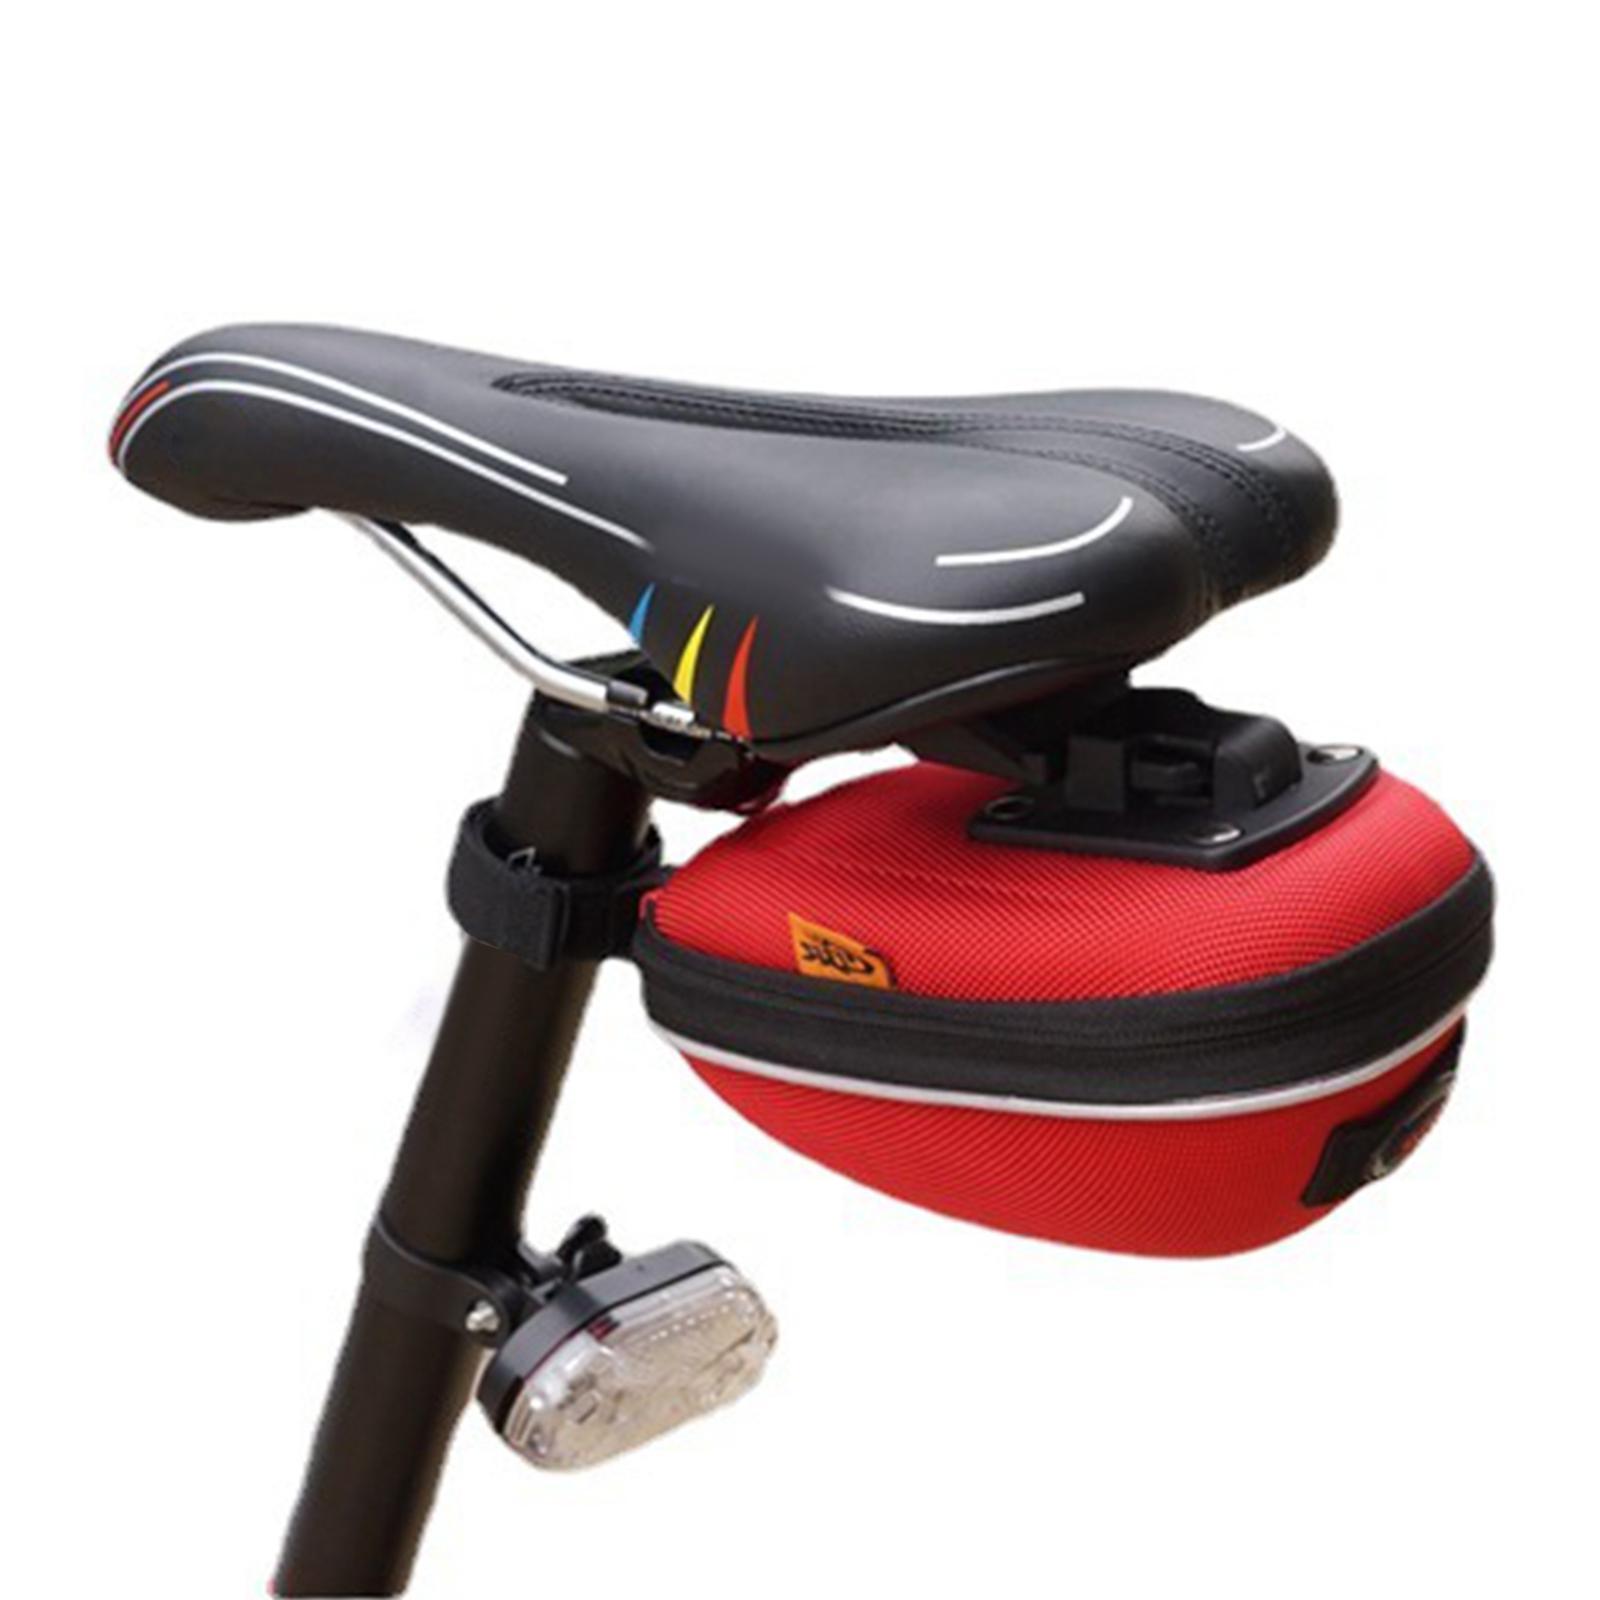 Bike Trunk Bag  Bag Pouch Luggage Trunk Bag Saddle Bag Rear Rack Bag Backseat Bag for Cycling Travel Touring  Accessories